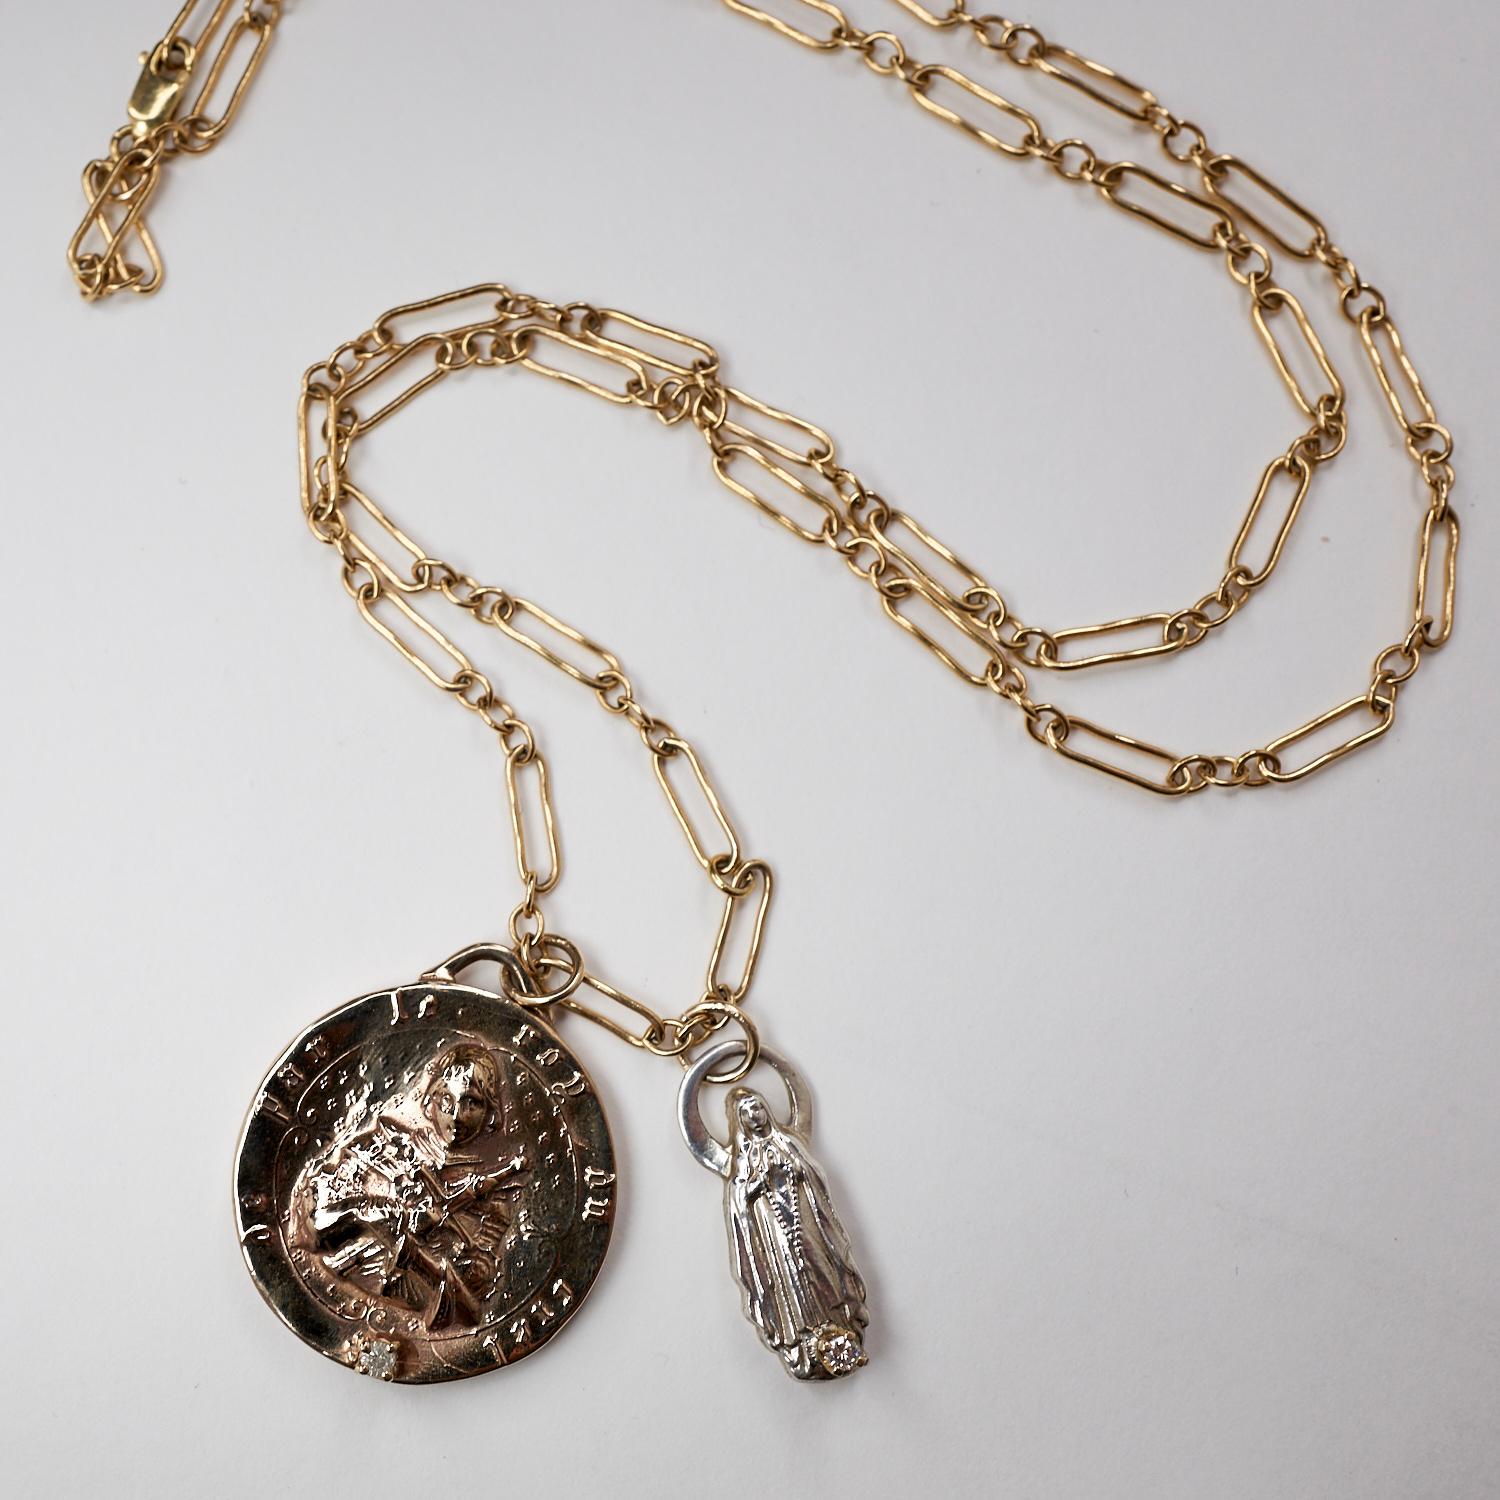 Victorian White Diamond Chain Necklace Medal Pendant Joan of Arc Virgin Mary J Dauphin For Sale